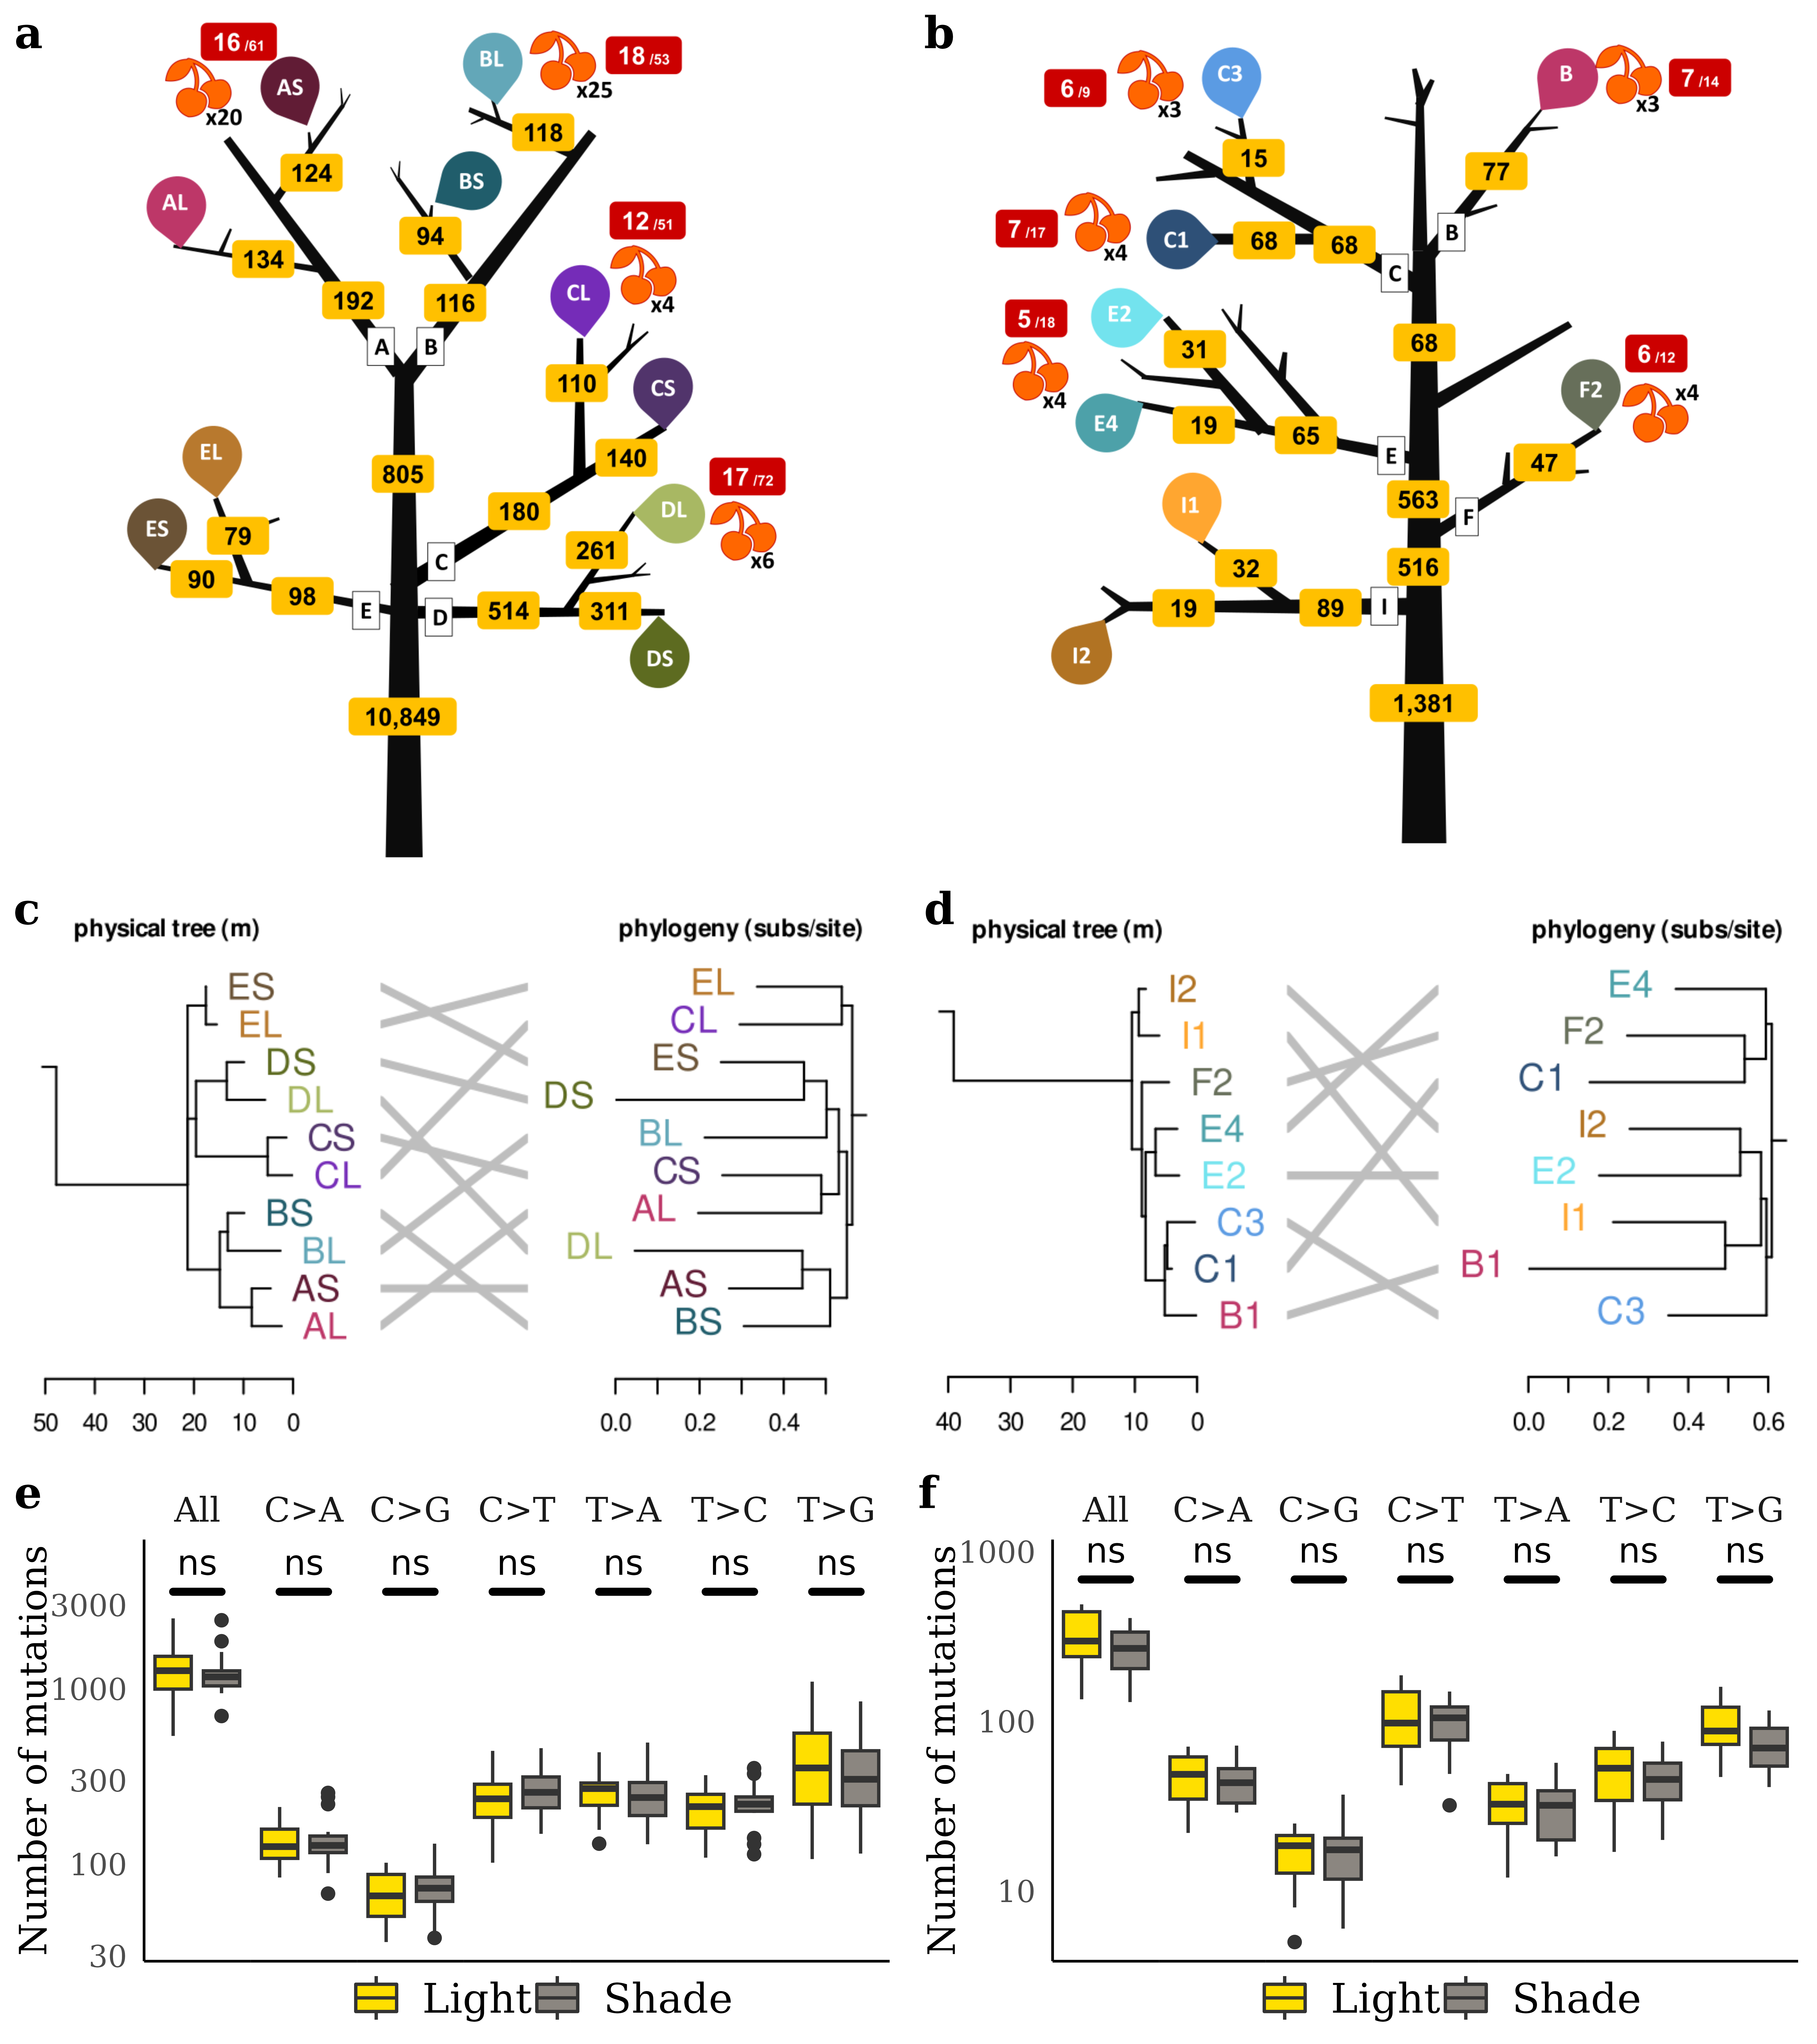 Fig. 2 | Somatic mutation distributions through physical trees, phylogenies, and with light. Somatic mutation distributions through physical trees, phylogenies, and with light are similarly portrayed for the two tropical trees: the Dicorynia guianensis tree named Angela (a,c,e), and the Sextonia rubra tree named Sixto (b,d,f). (a-b) The physical architecture of the tree is shown in black with the bough names in white boxes. The number of somatic mutations through the crown is indicated in the yellow boxes before the original branching event. The balloons circles indicate the sample points of three leaves in the light-exposed branches (light colours) and in the shaded branches (dark colours). Fruit sampling points are represented by red fruits, with the number of fruits sampled indicated in black. The red boxes with white labels indicate the transmission of mutations to fruit embryos out of the total number of mutations tested. (c-d) A side-by-side comparison of the physical tree (left, branch length in metres) and the maximum likelihood phylogeny (right, branch length in substitutions per site). The letters on the ends of the branches indicate the sample points with unique colours. (e-f) The effect of light exposure on the accumulation of somatic mutations as a function of mutation type is represented in yellow and grey boxes. The yellow boxes represent the number of mutations accumulated in all leaves of light exposed branches and the grey boxes in all leaves of shaded branches. The 'ns' labels indicate non-significant differences in Student's t-tests. Mutation types include all mutations and all types of transitions and transversions. The y-axis has been scaled logarithmically to facilitate reading of low values.